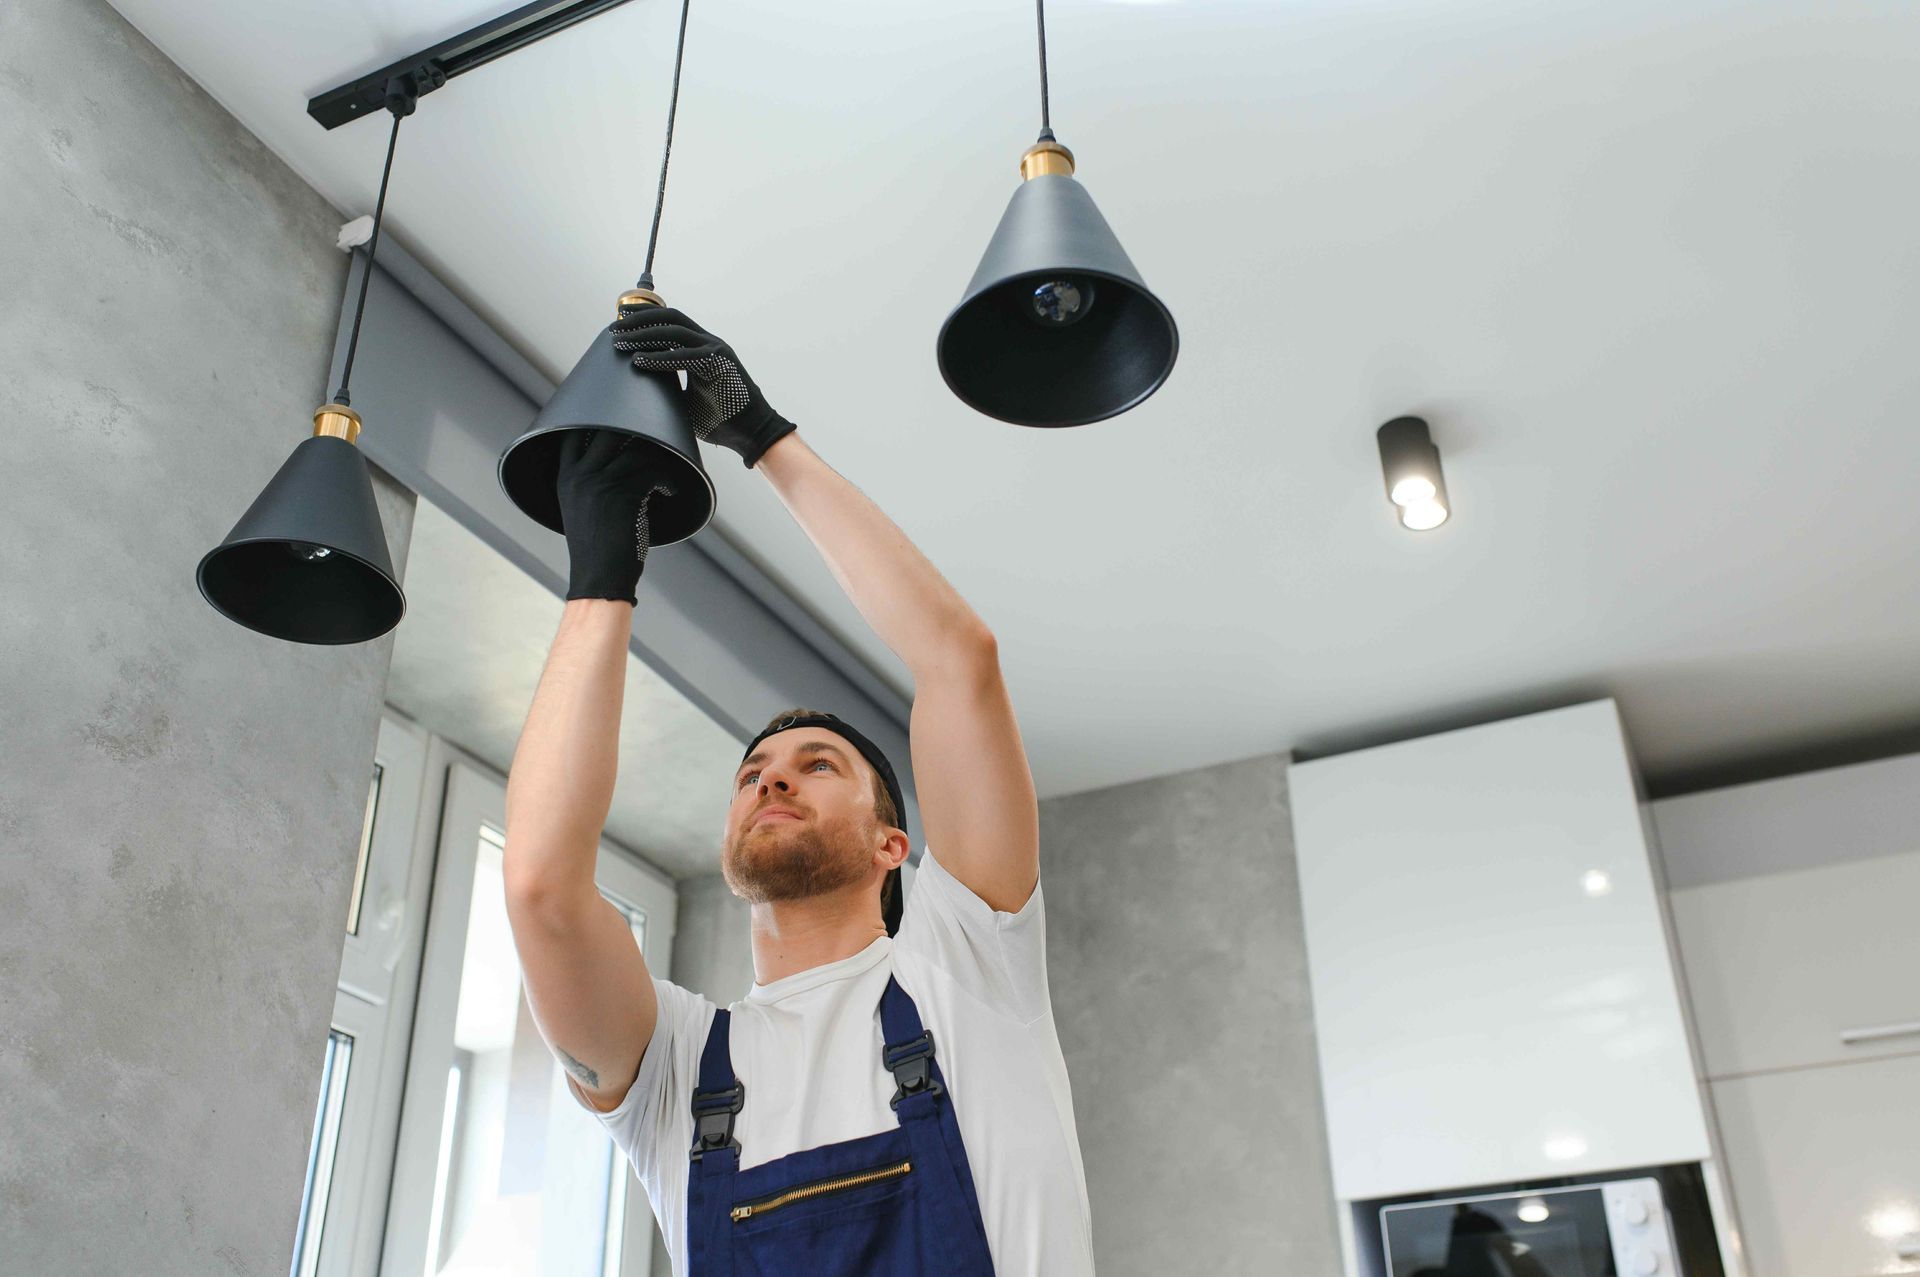 Professional Electrician Installing Hanging Lights In Kitchen